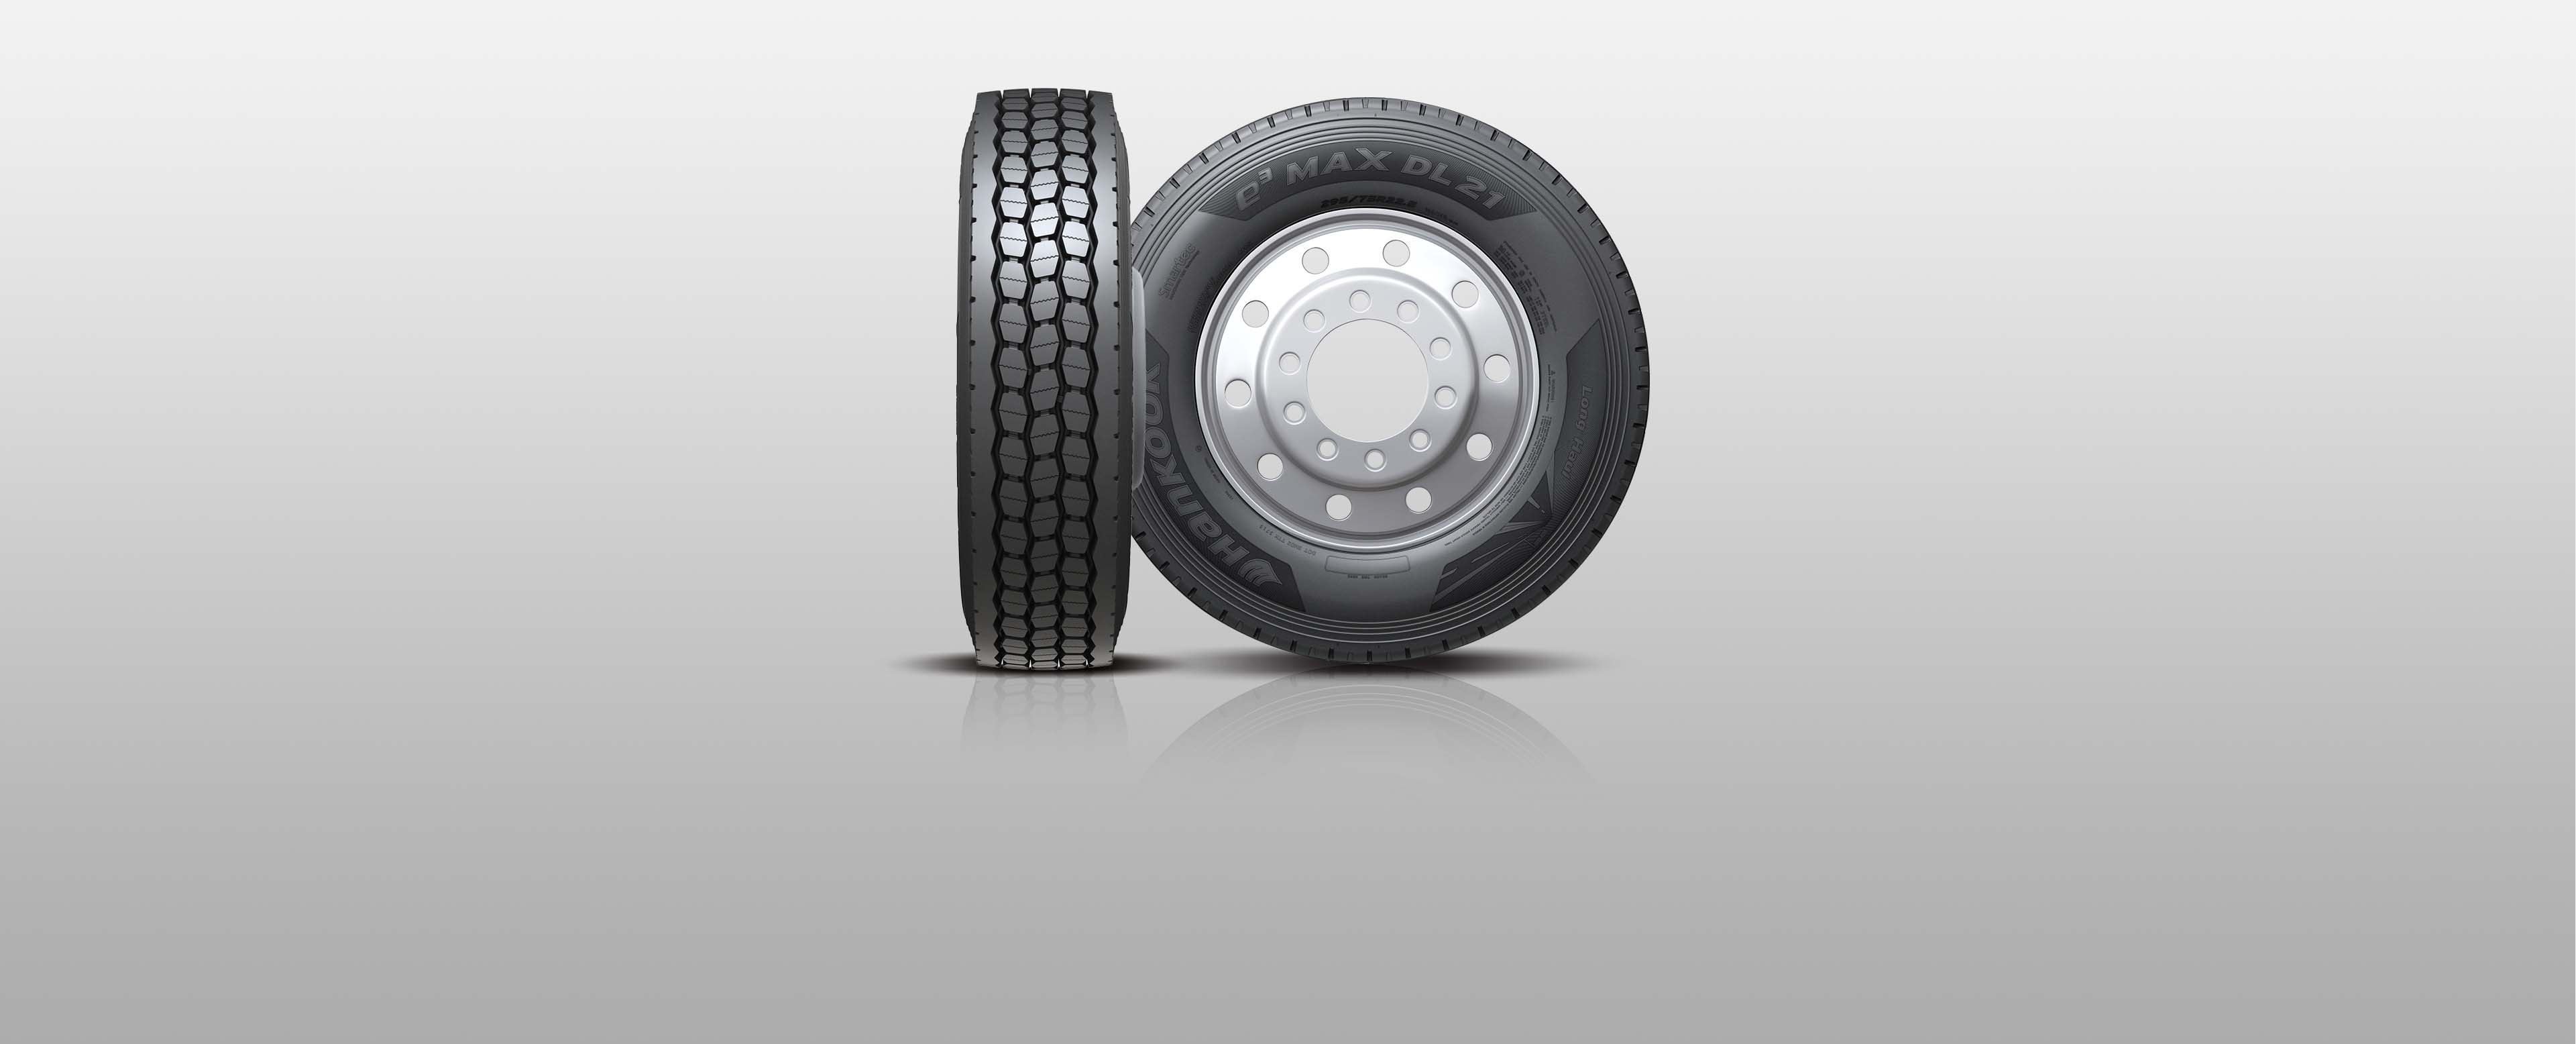 Hankook Tire & Technology-Tires-Smart-Smart Max-DL21-Long Haul Drive Tire with Long Mileage and Fuel Efficiency